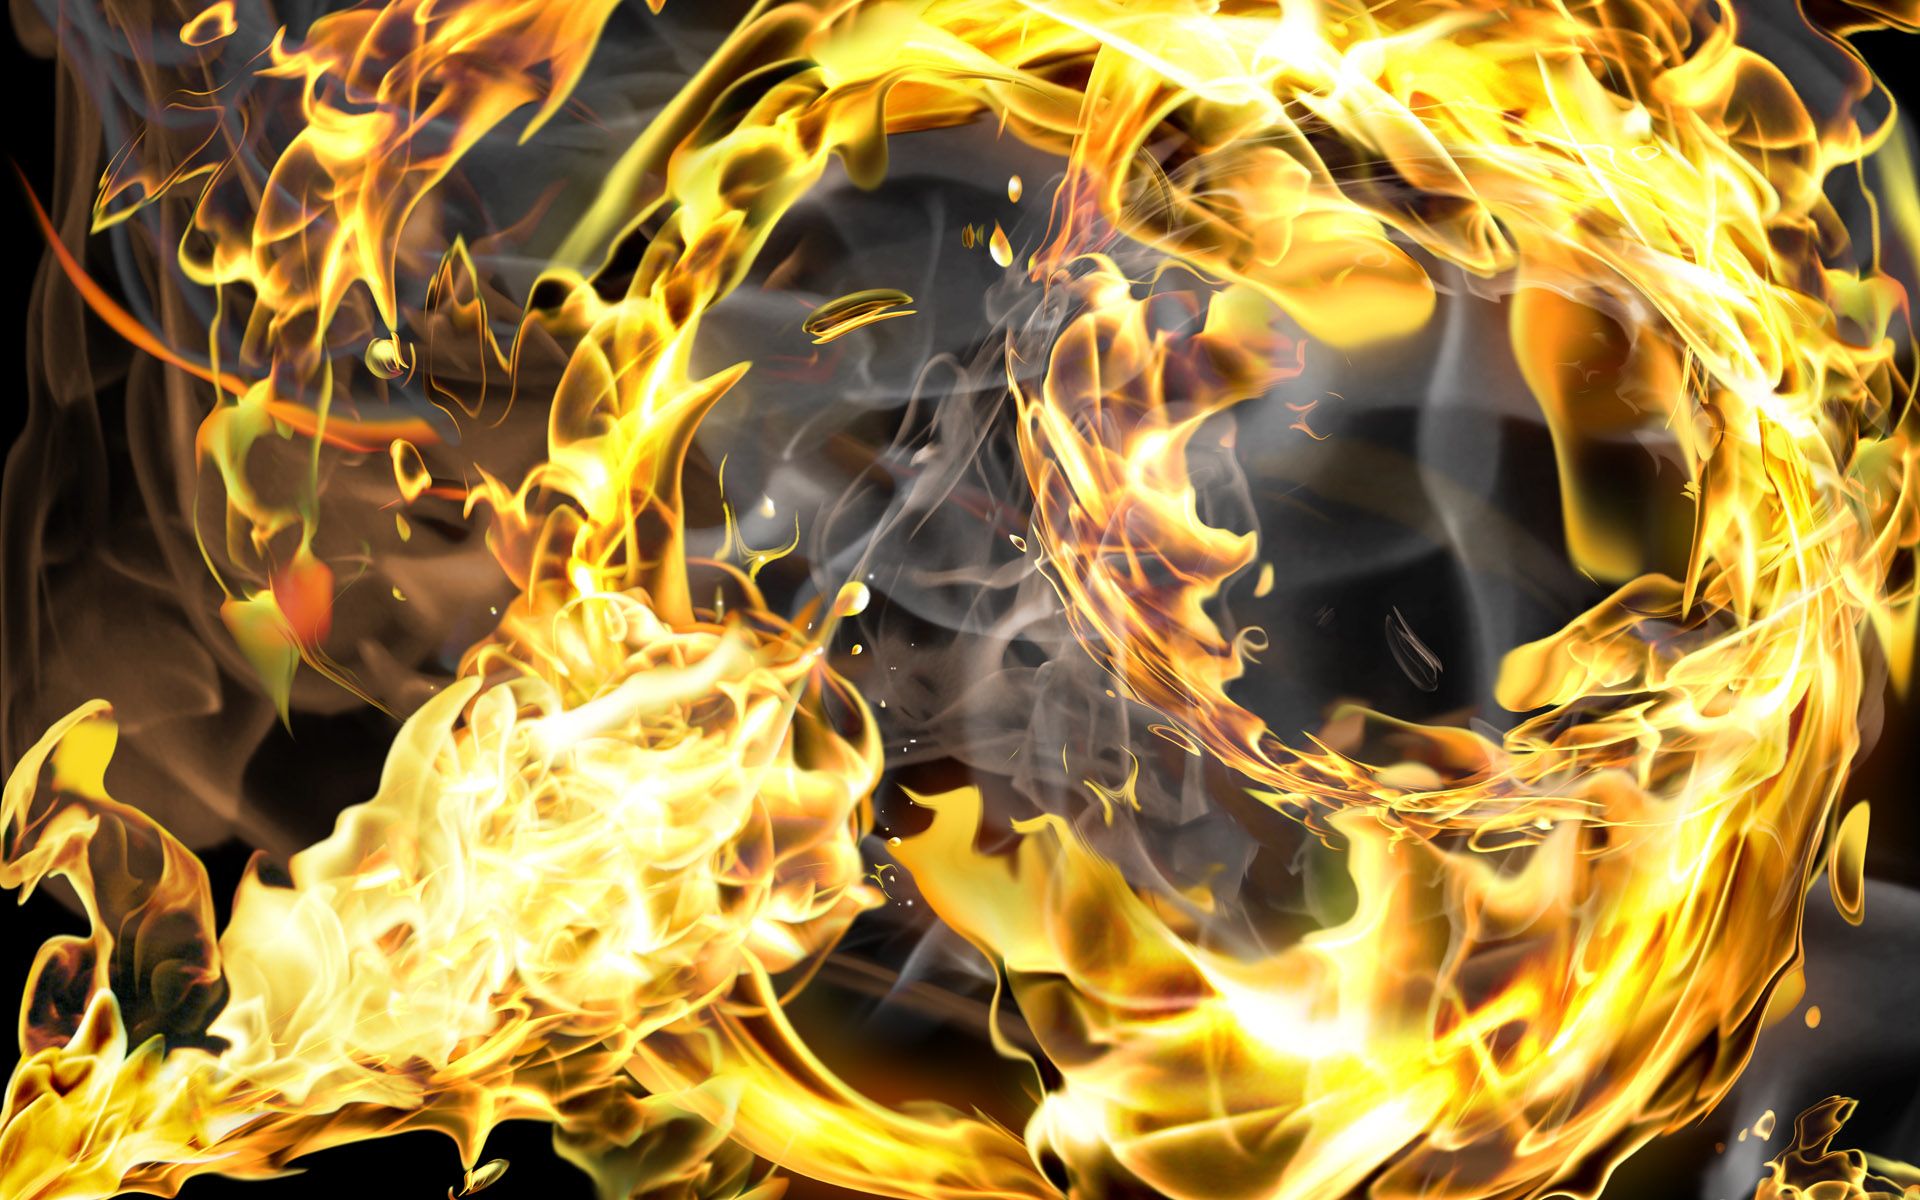 Playing with fire wallpaper and image, picture, photo